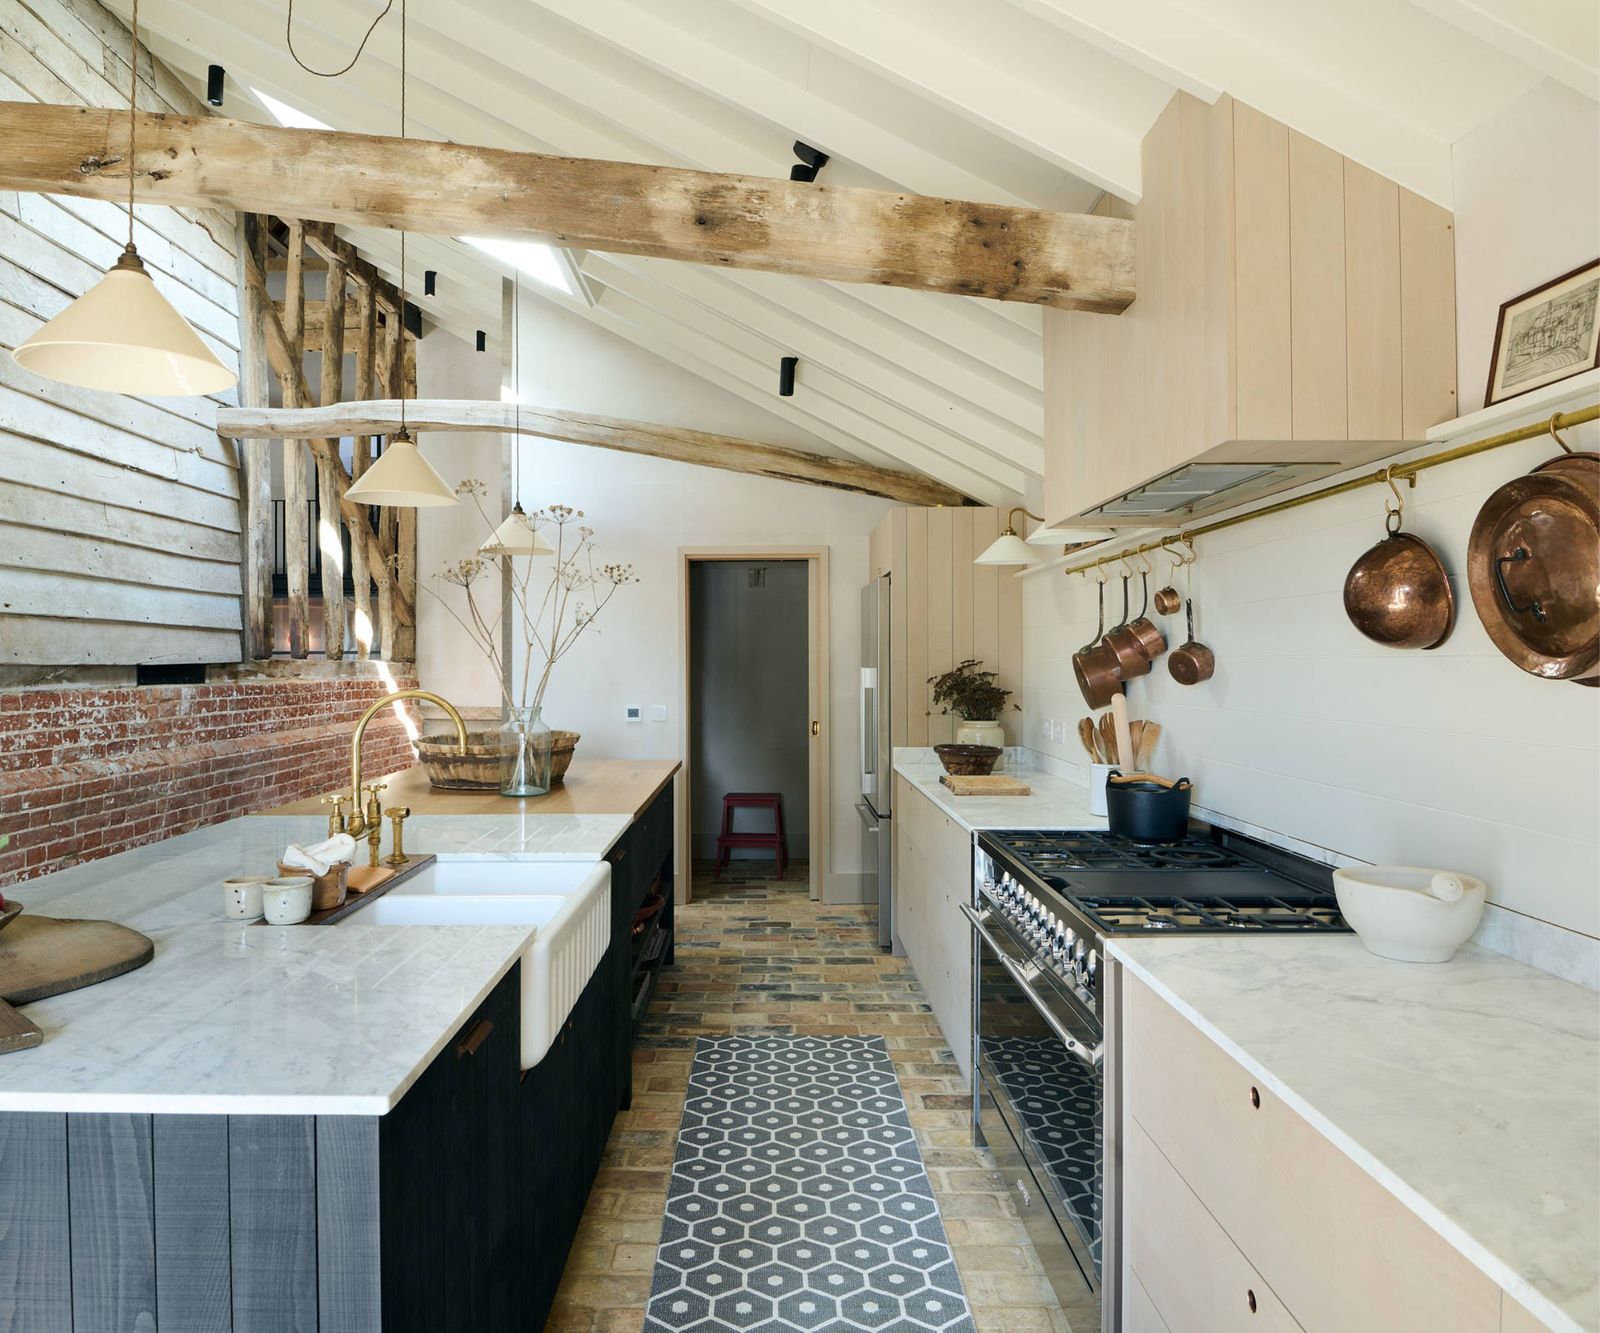 Narrow kitchen layout rules: 9 ways to make yours work better